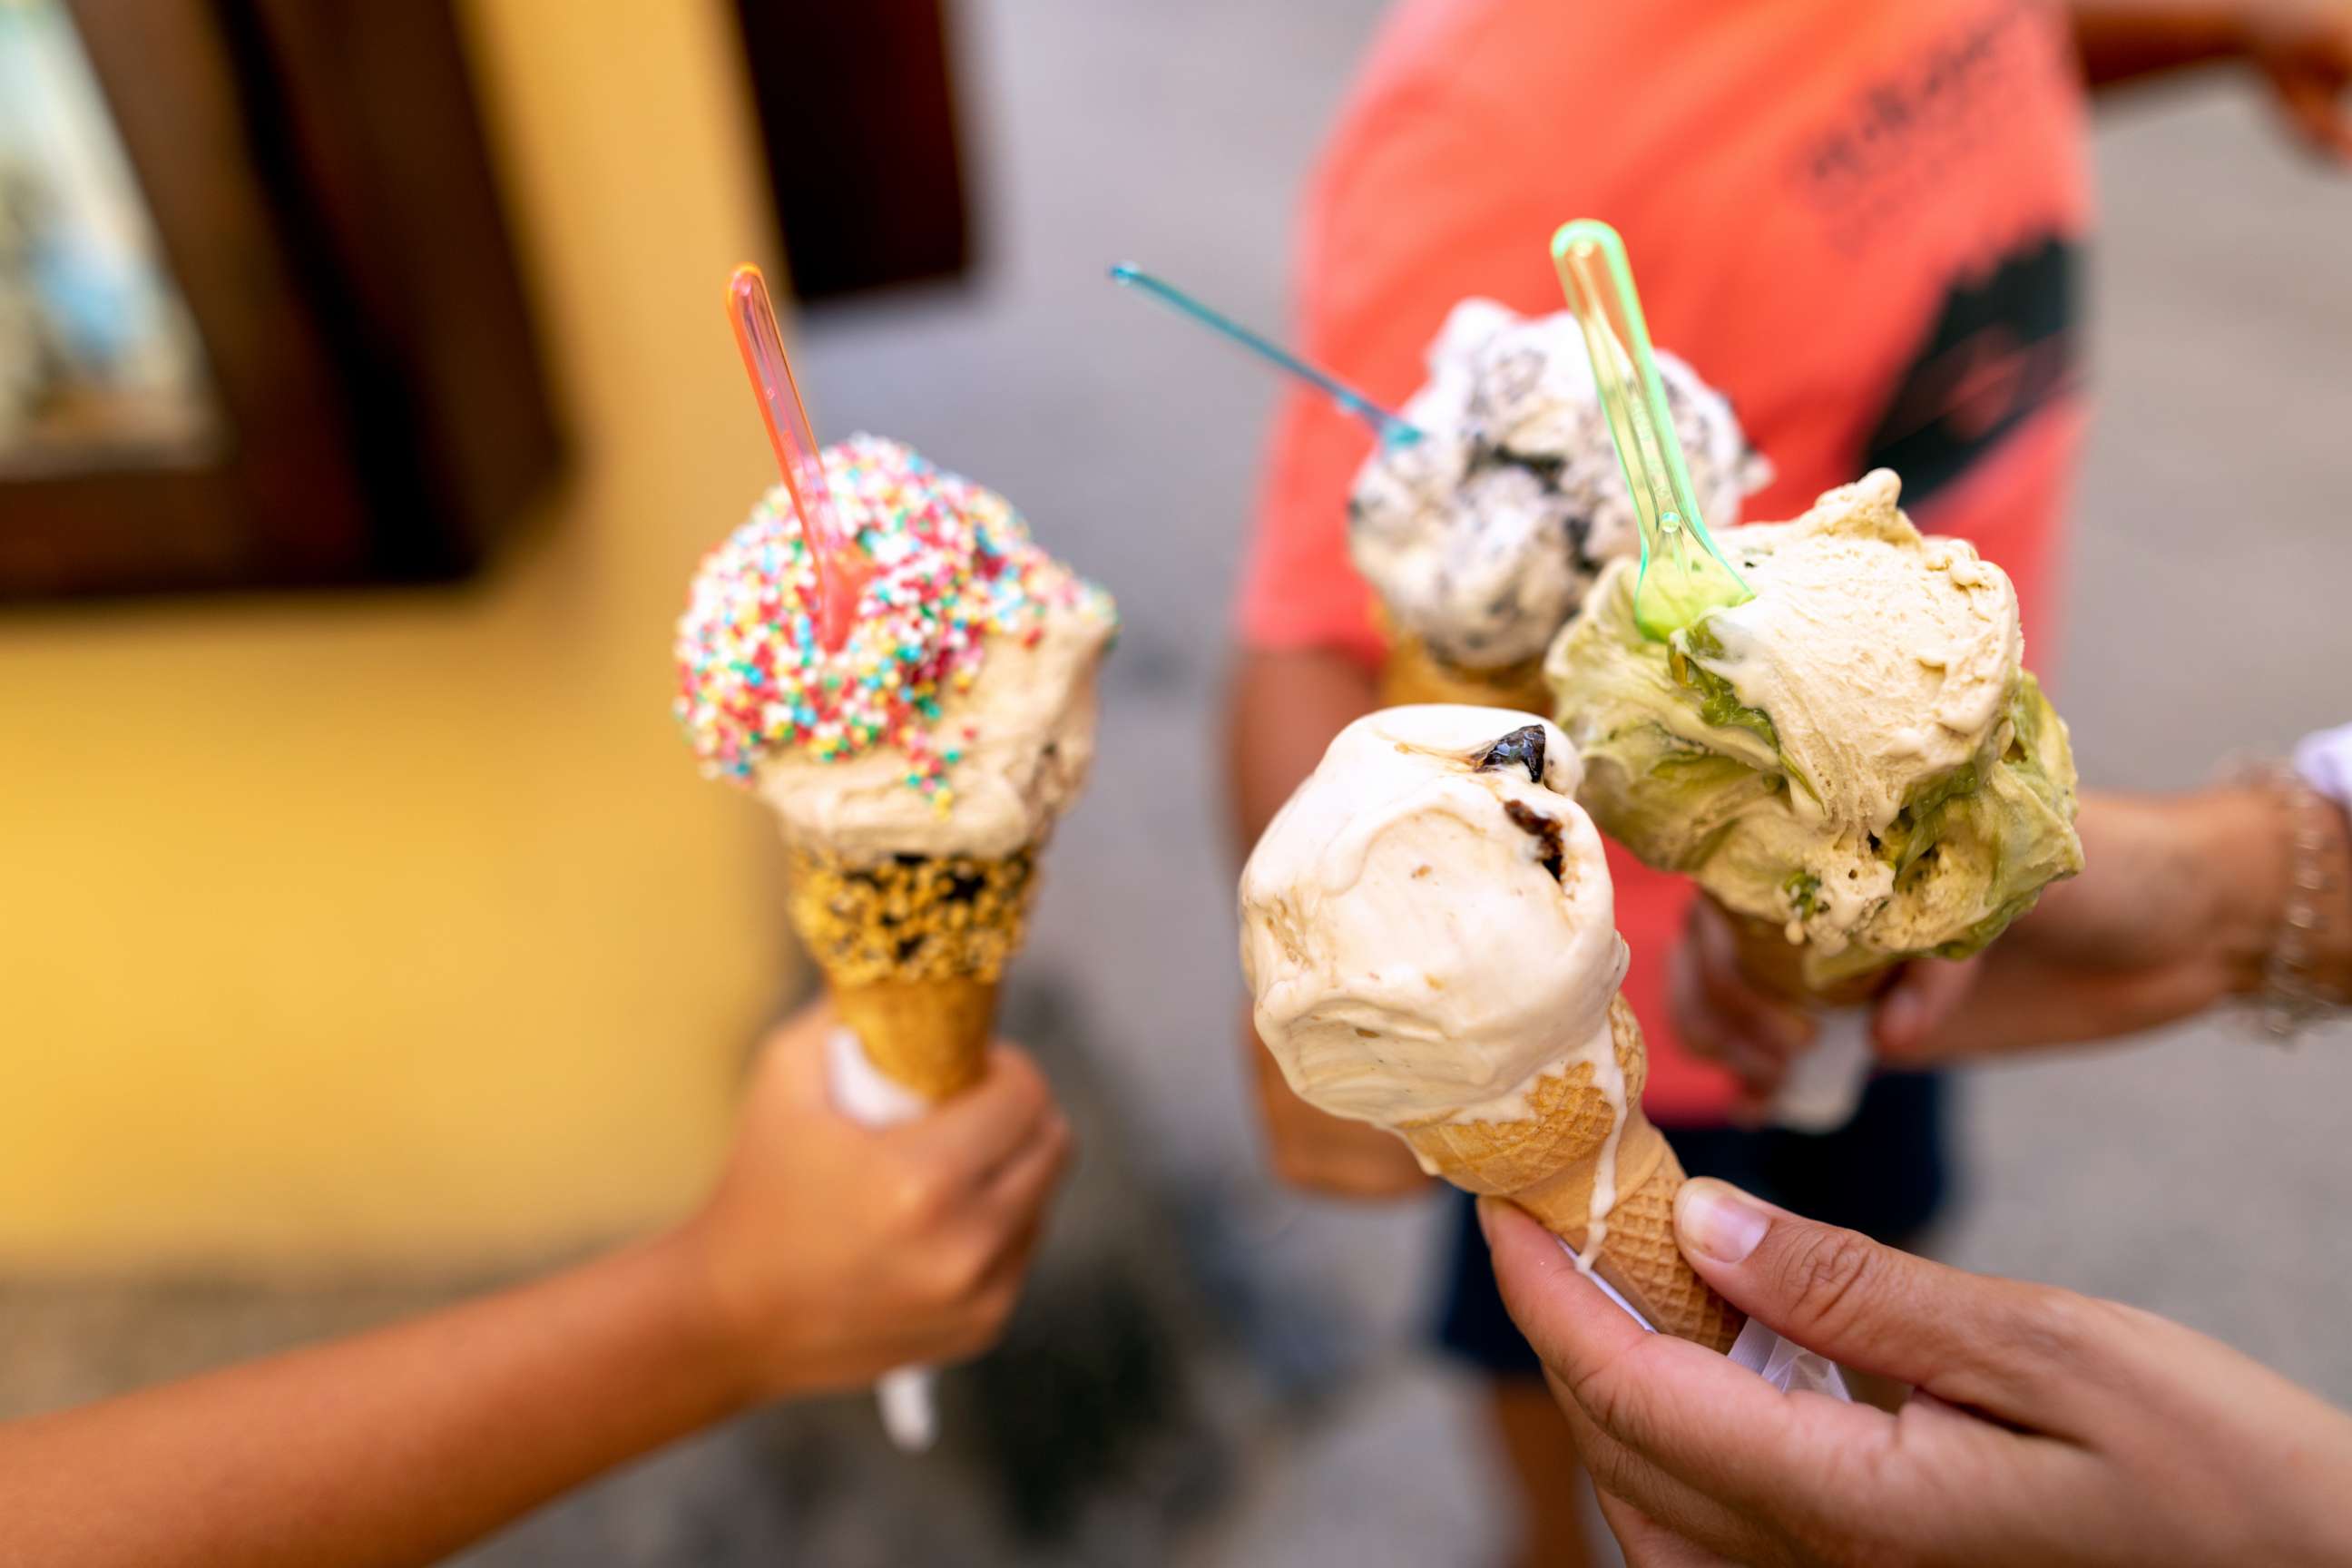 Thrifty Ice Cream was crafted in L.A. nearly 100 years ago. And